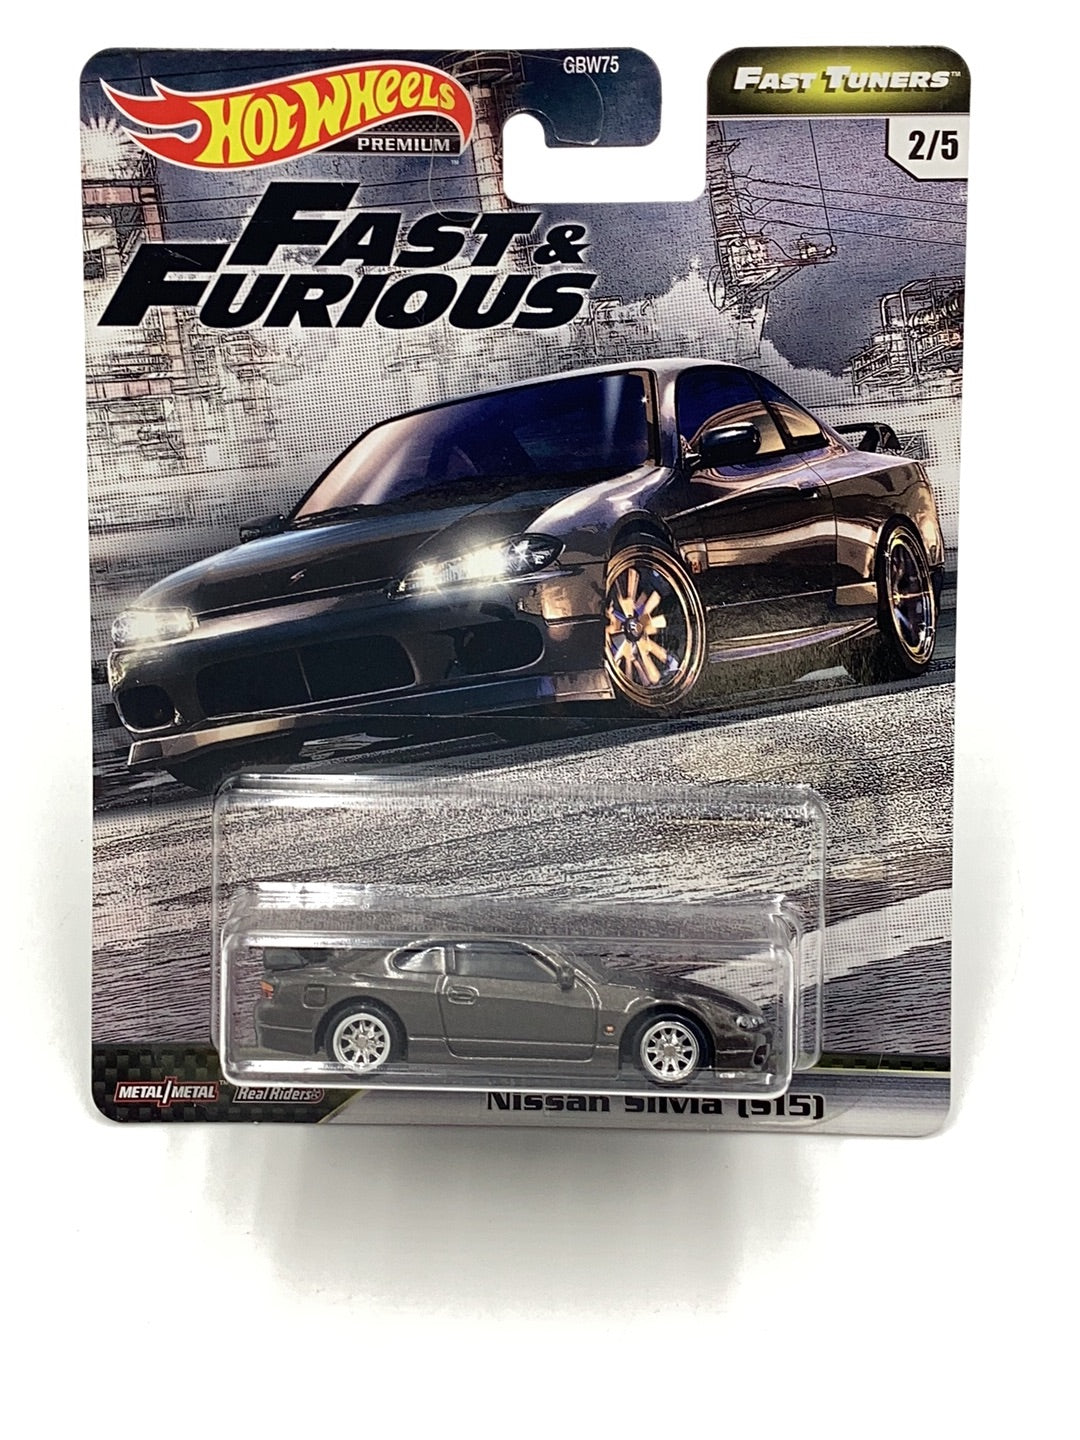 Hot wheels premium fast and furious Fast Tuners 2/5 Nissan Silvia S15 with protector